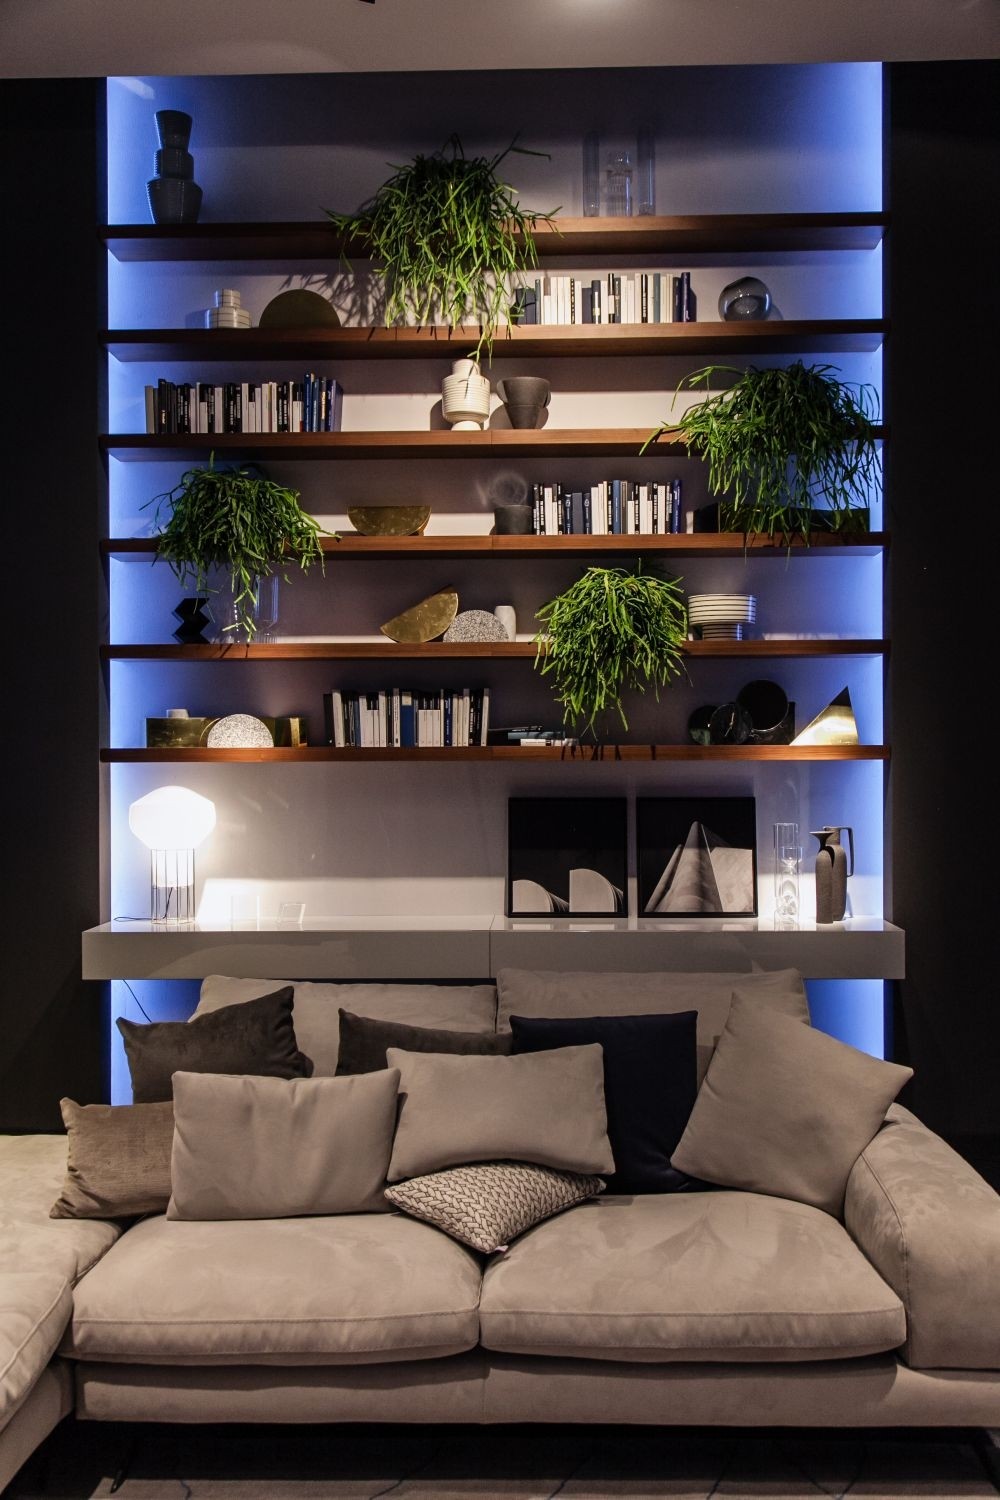 Creative uses and ideas for wall mounted shelves in home